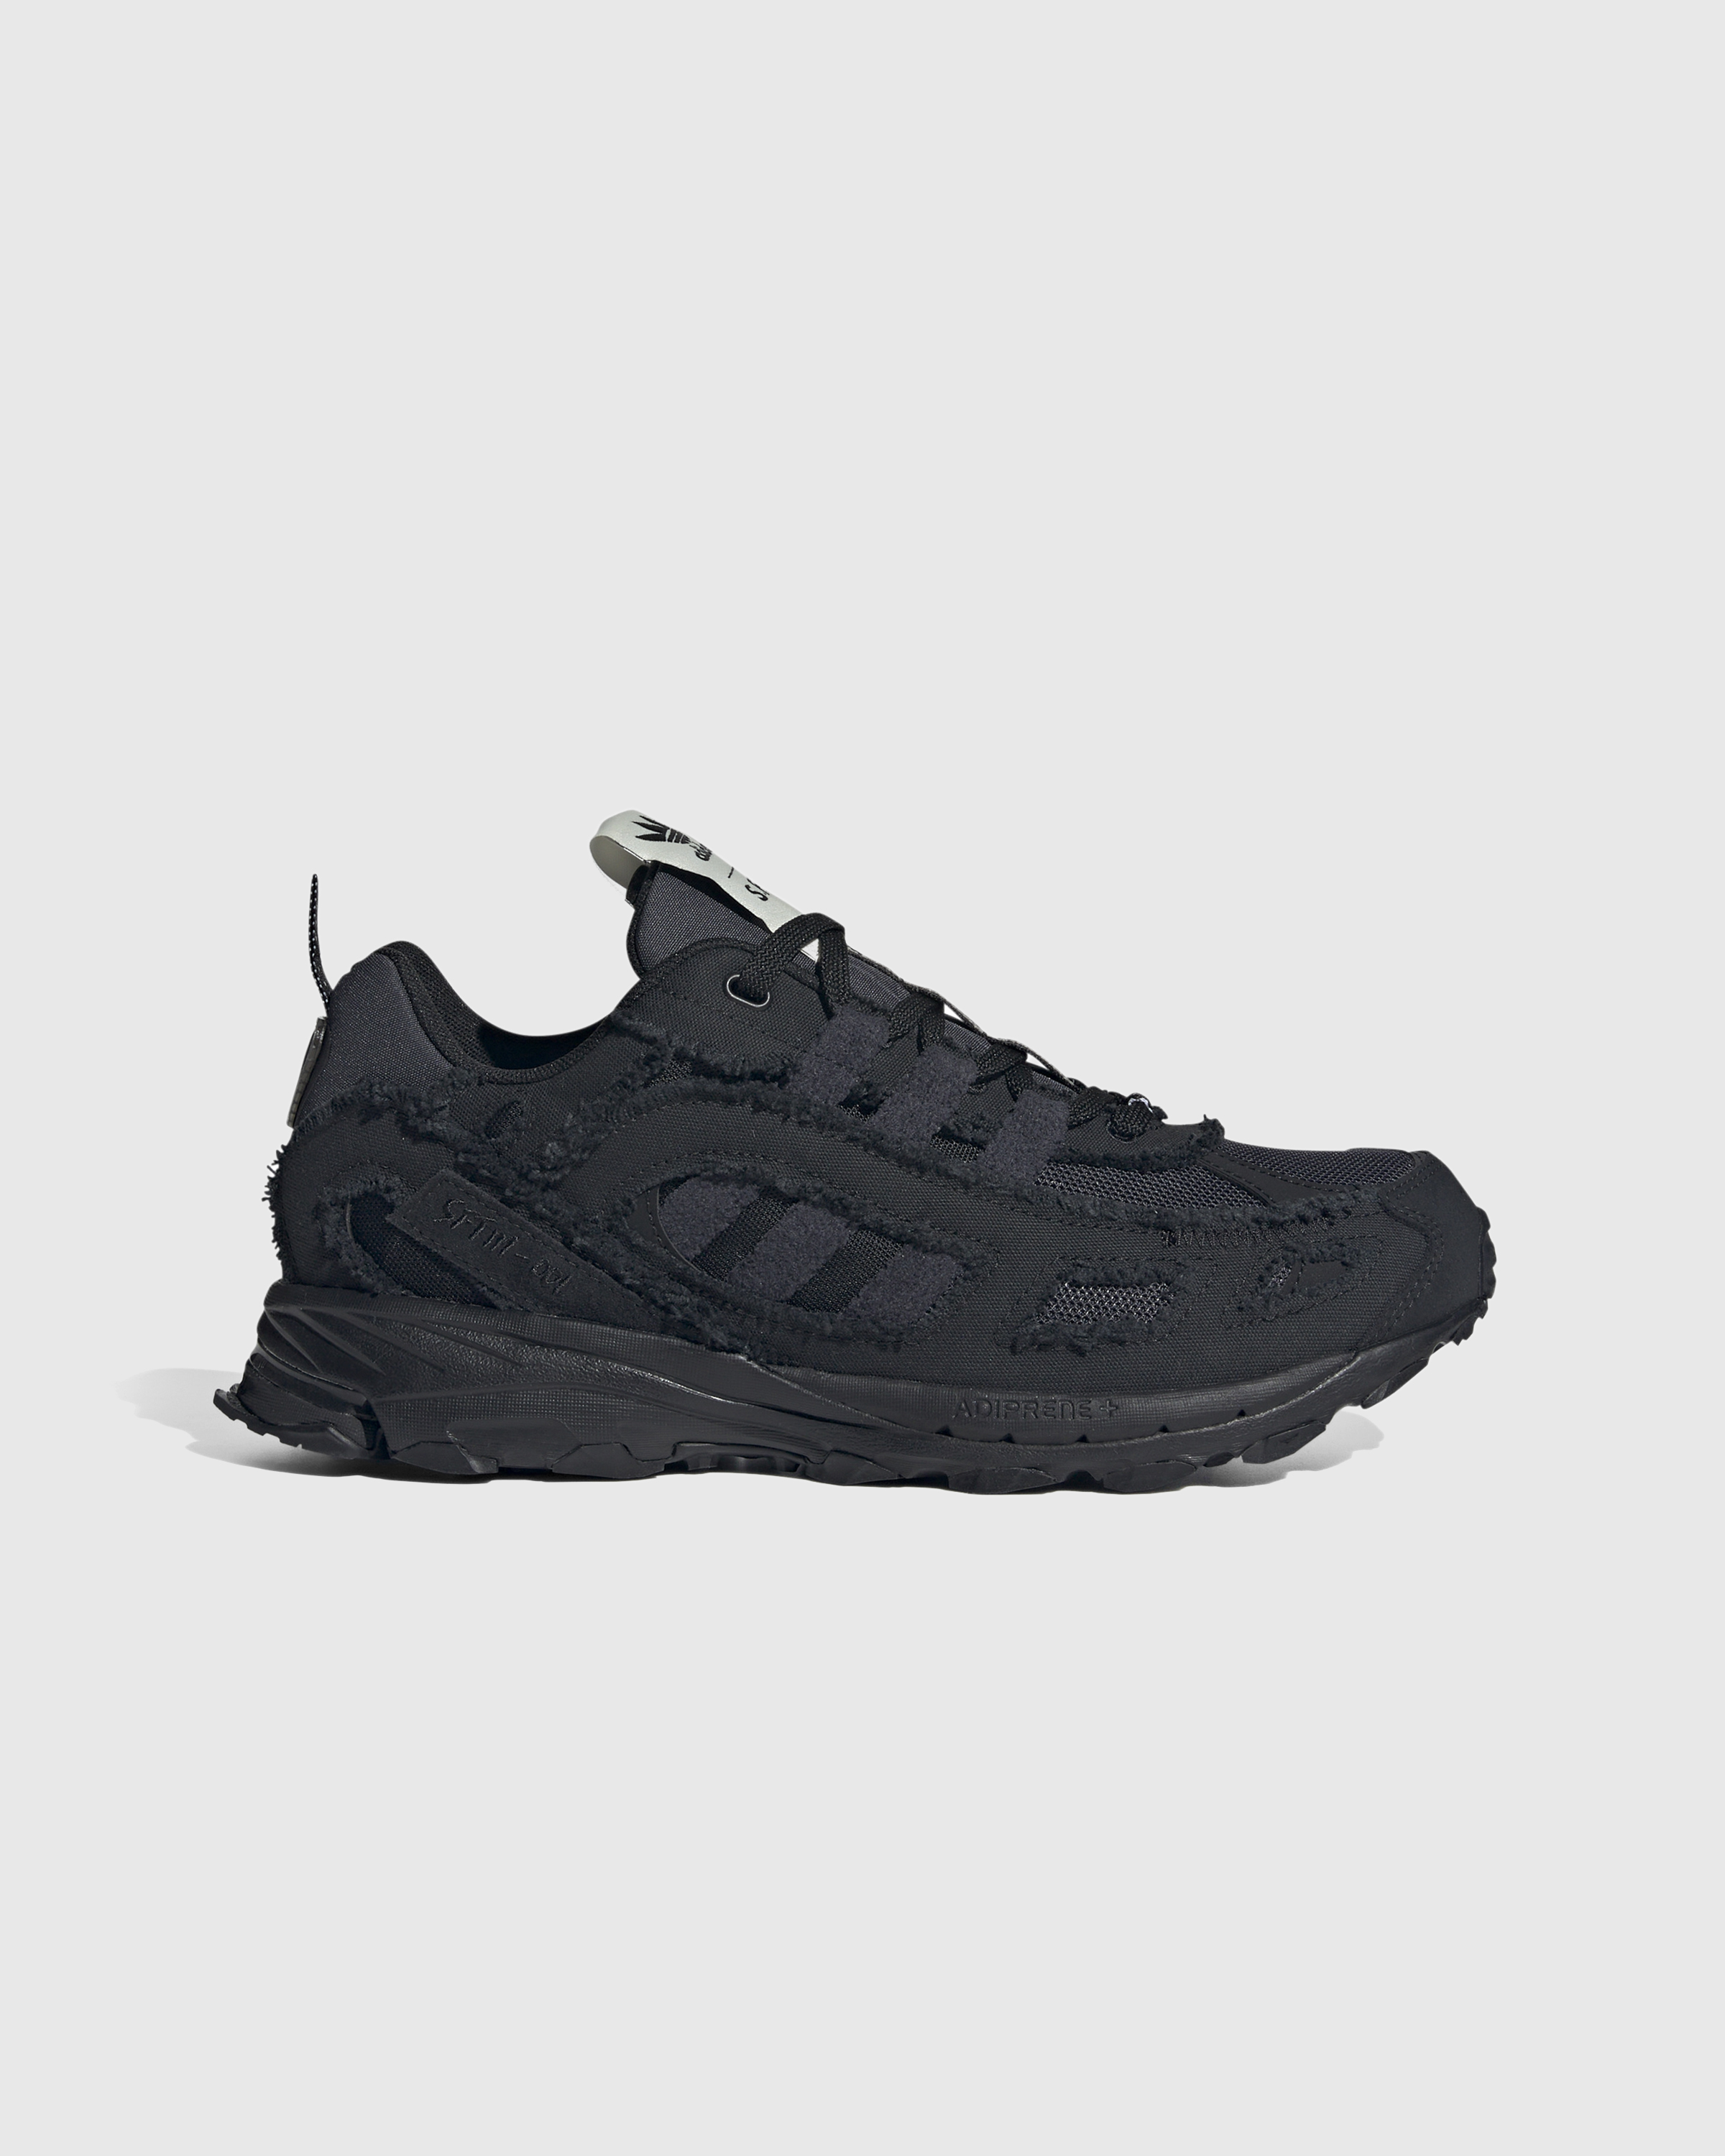 Adidas x Song For The Mute – Shadowturf SFTM-003 Core Black/Night Grey/Carbon - Low Top Sneakers - Black - Image 1